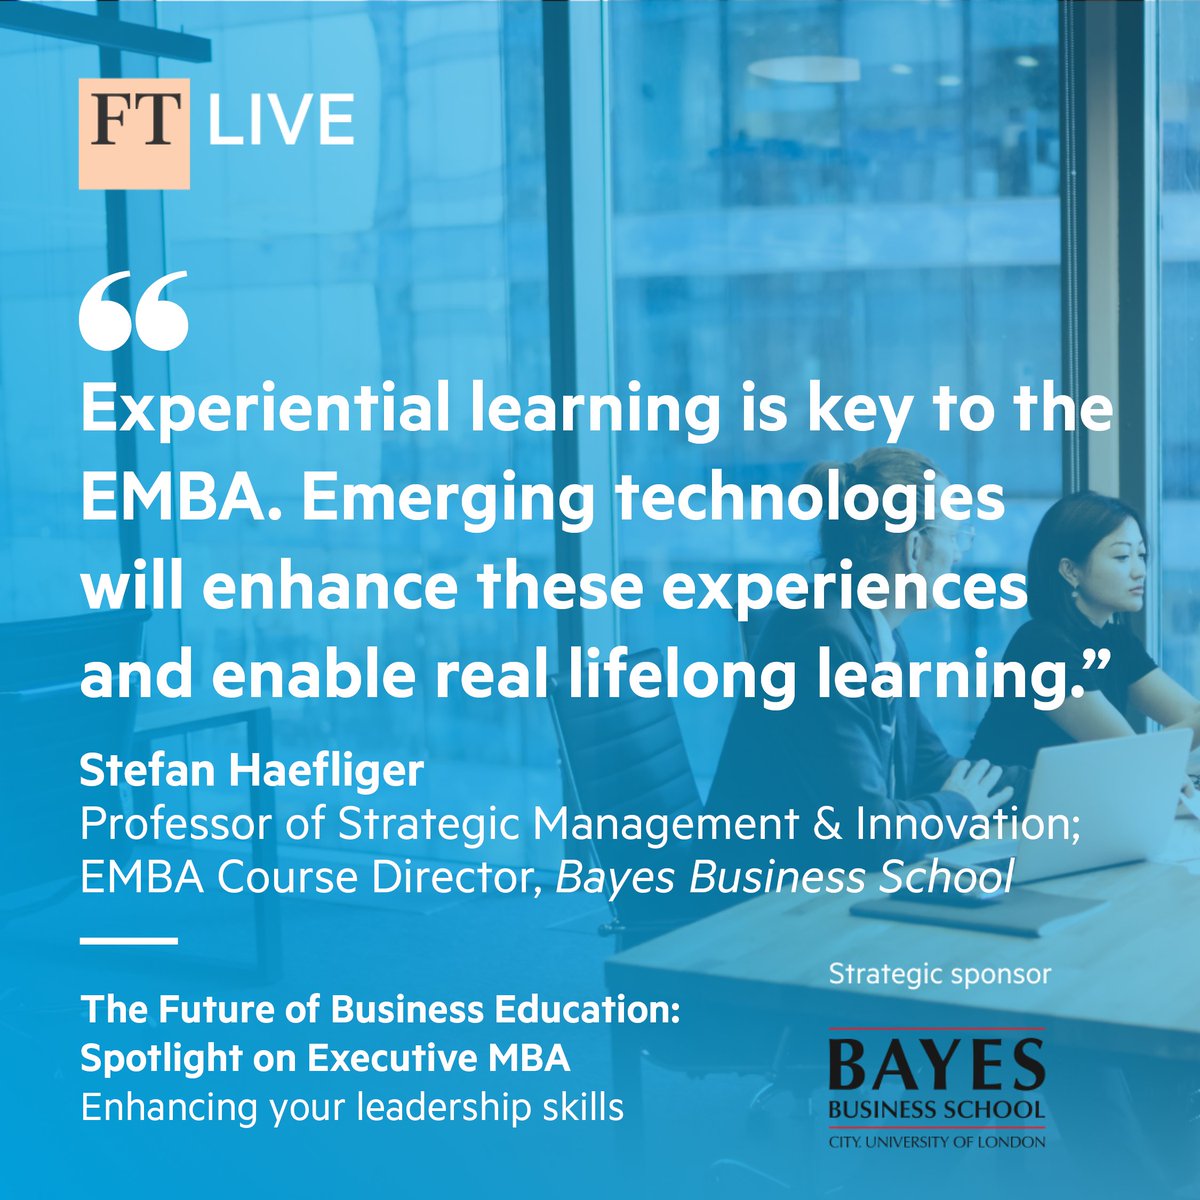 Join Bayes EMBA Course Director & Prof of Strategic Management & Innovation, Stefan Haefliger, as he discusses the challenges EMBA programmes will face as business education is transformed by technology, economic shifts, & changing demands of students & companies.